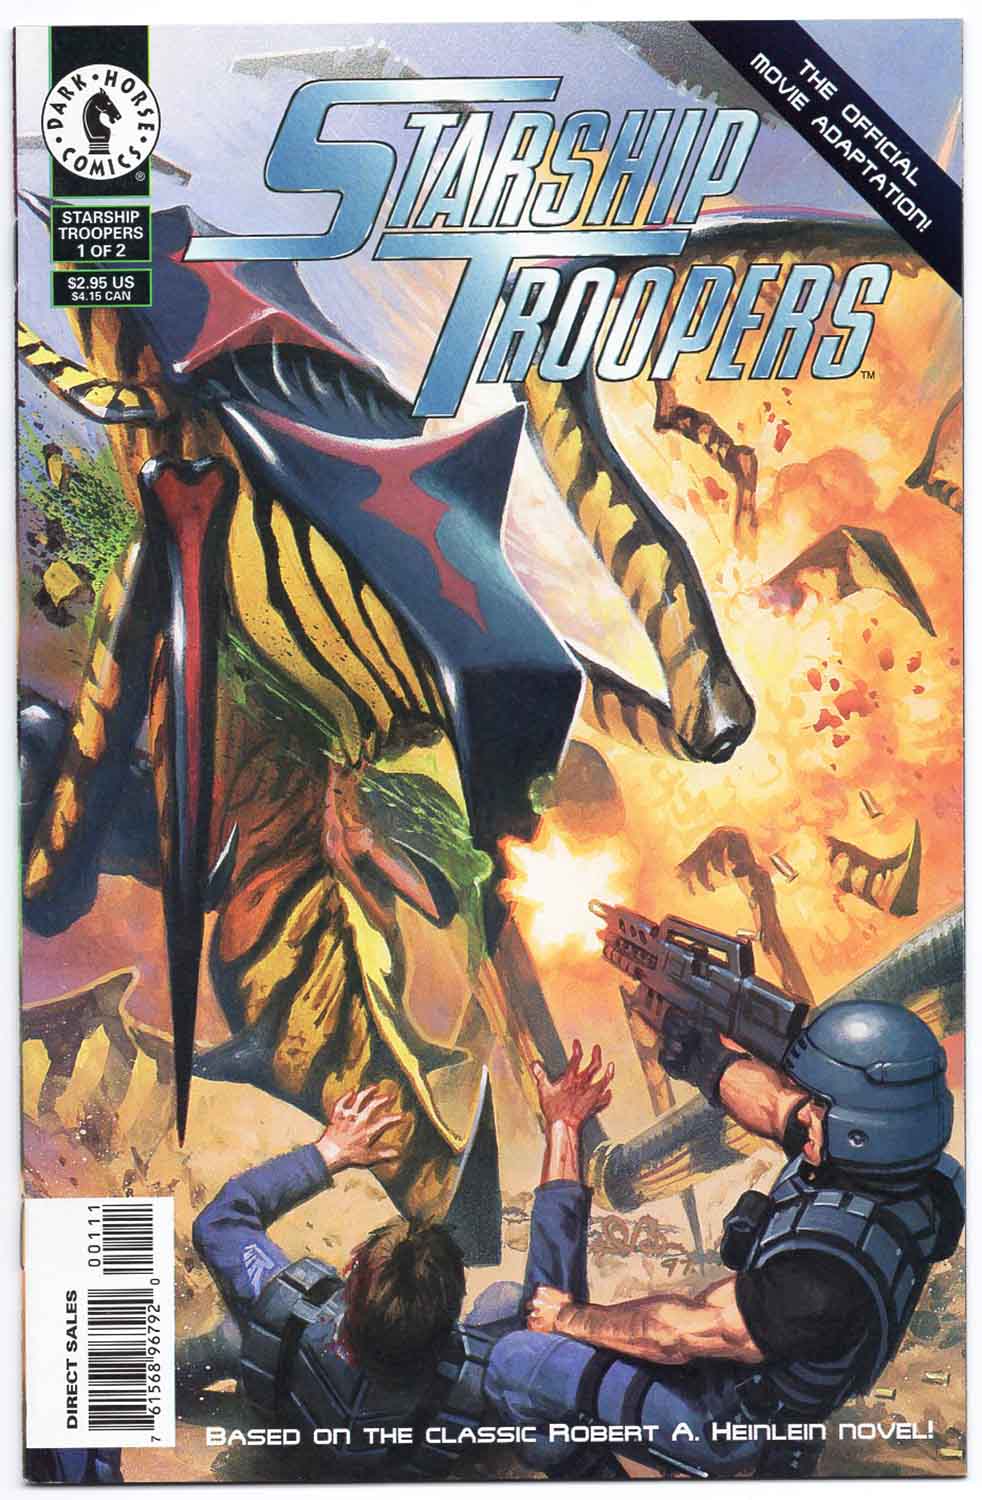 Starship Troopers #1